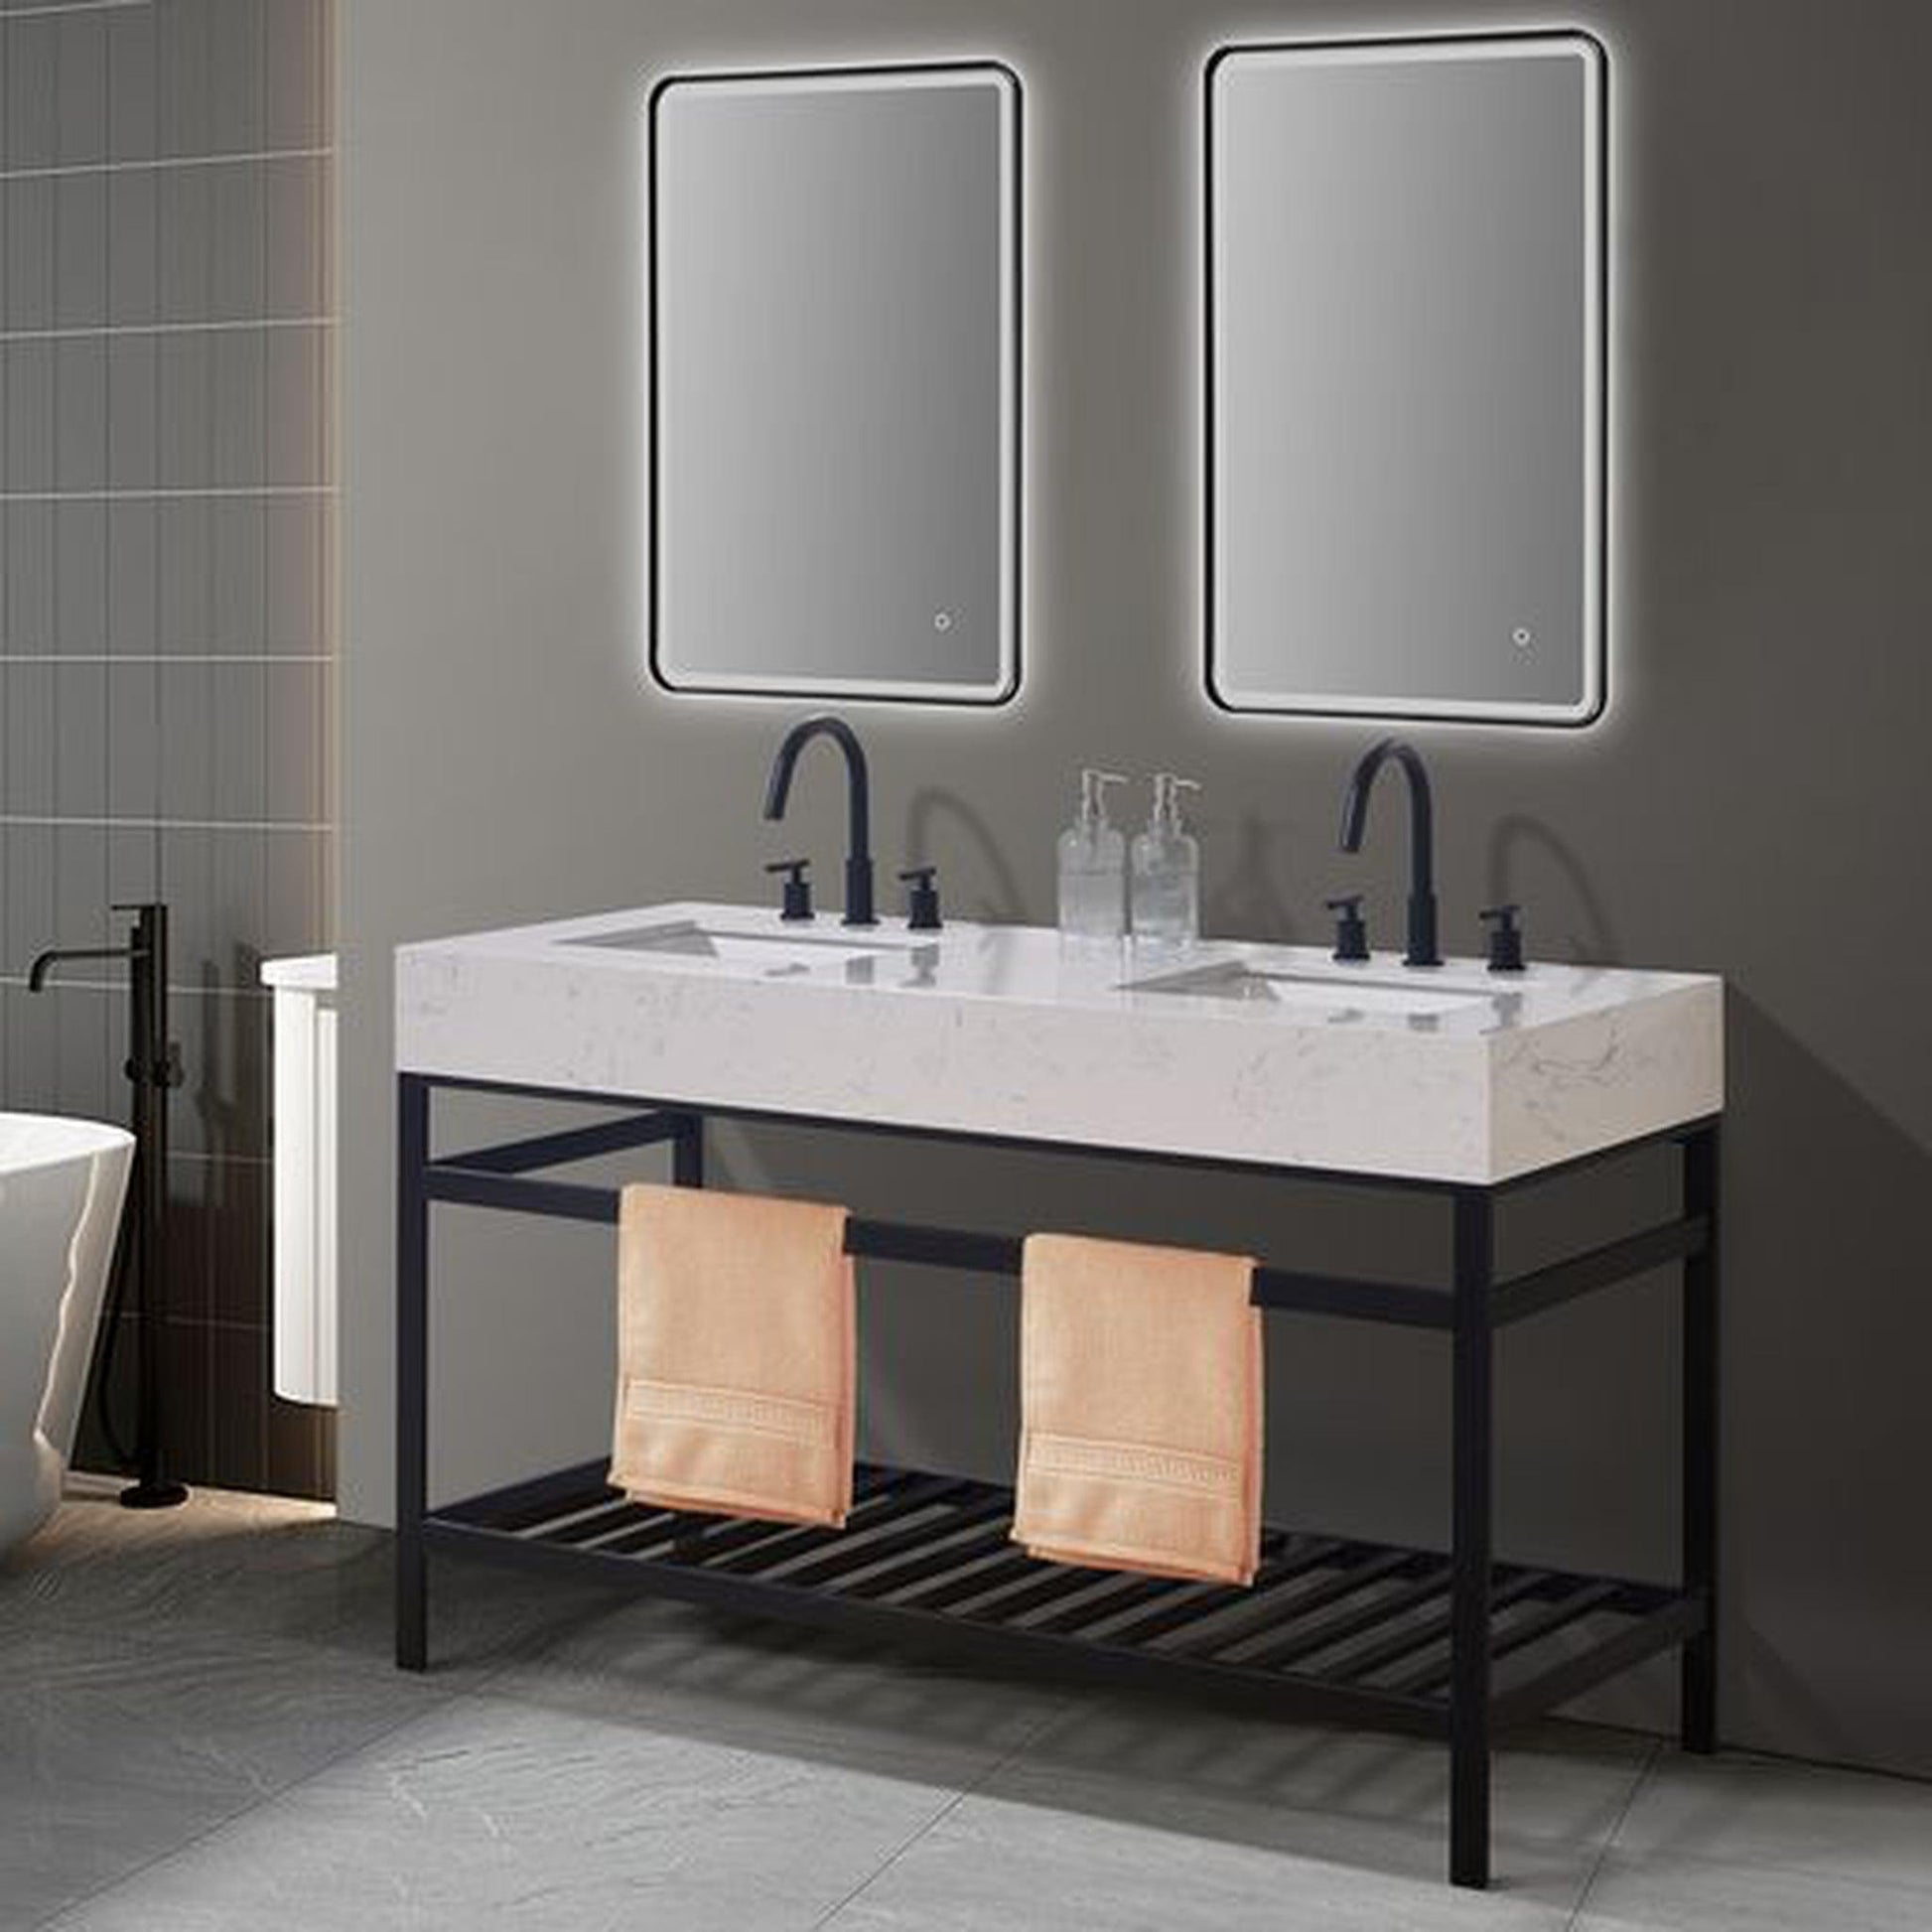 Altair Merano 60" Matte Black Double Stainless Steel Bathroom Vanity Set Console With Mirror, Aosta White Stone Top, Two Rectangular Undermount Ceramic Sinks, and Safety Overflow Hole